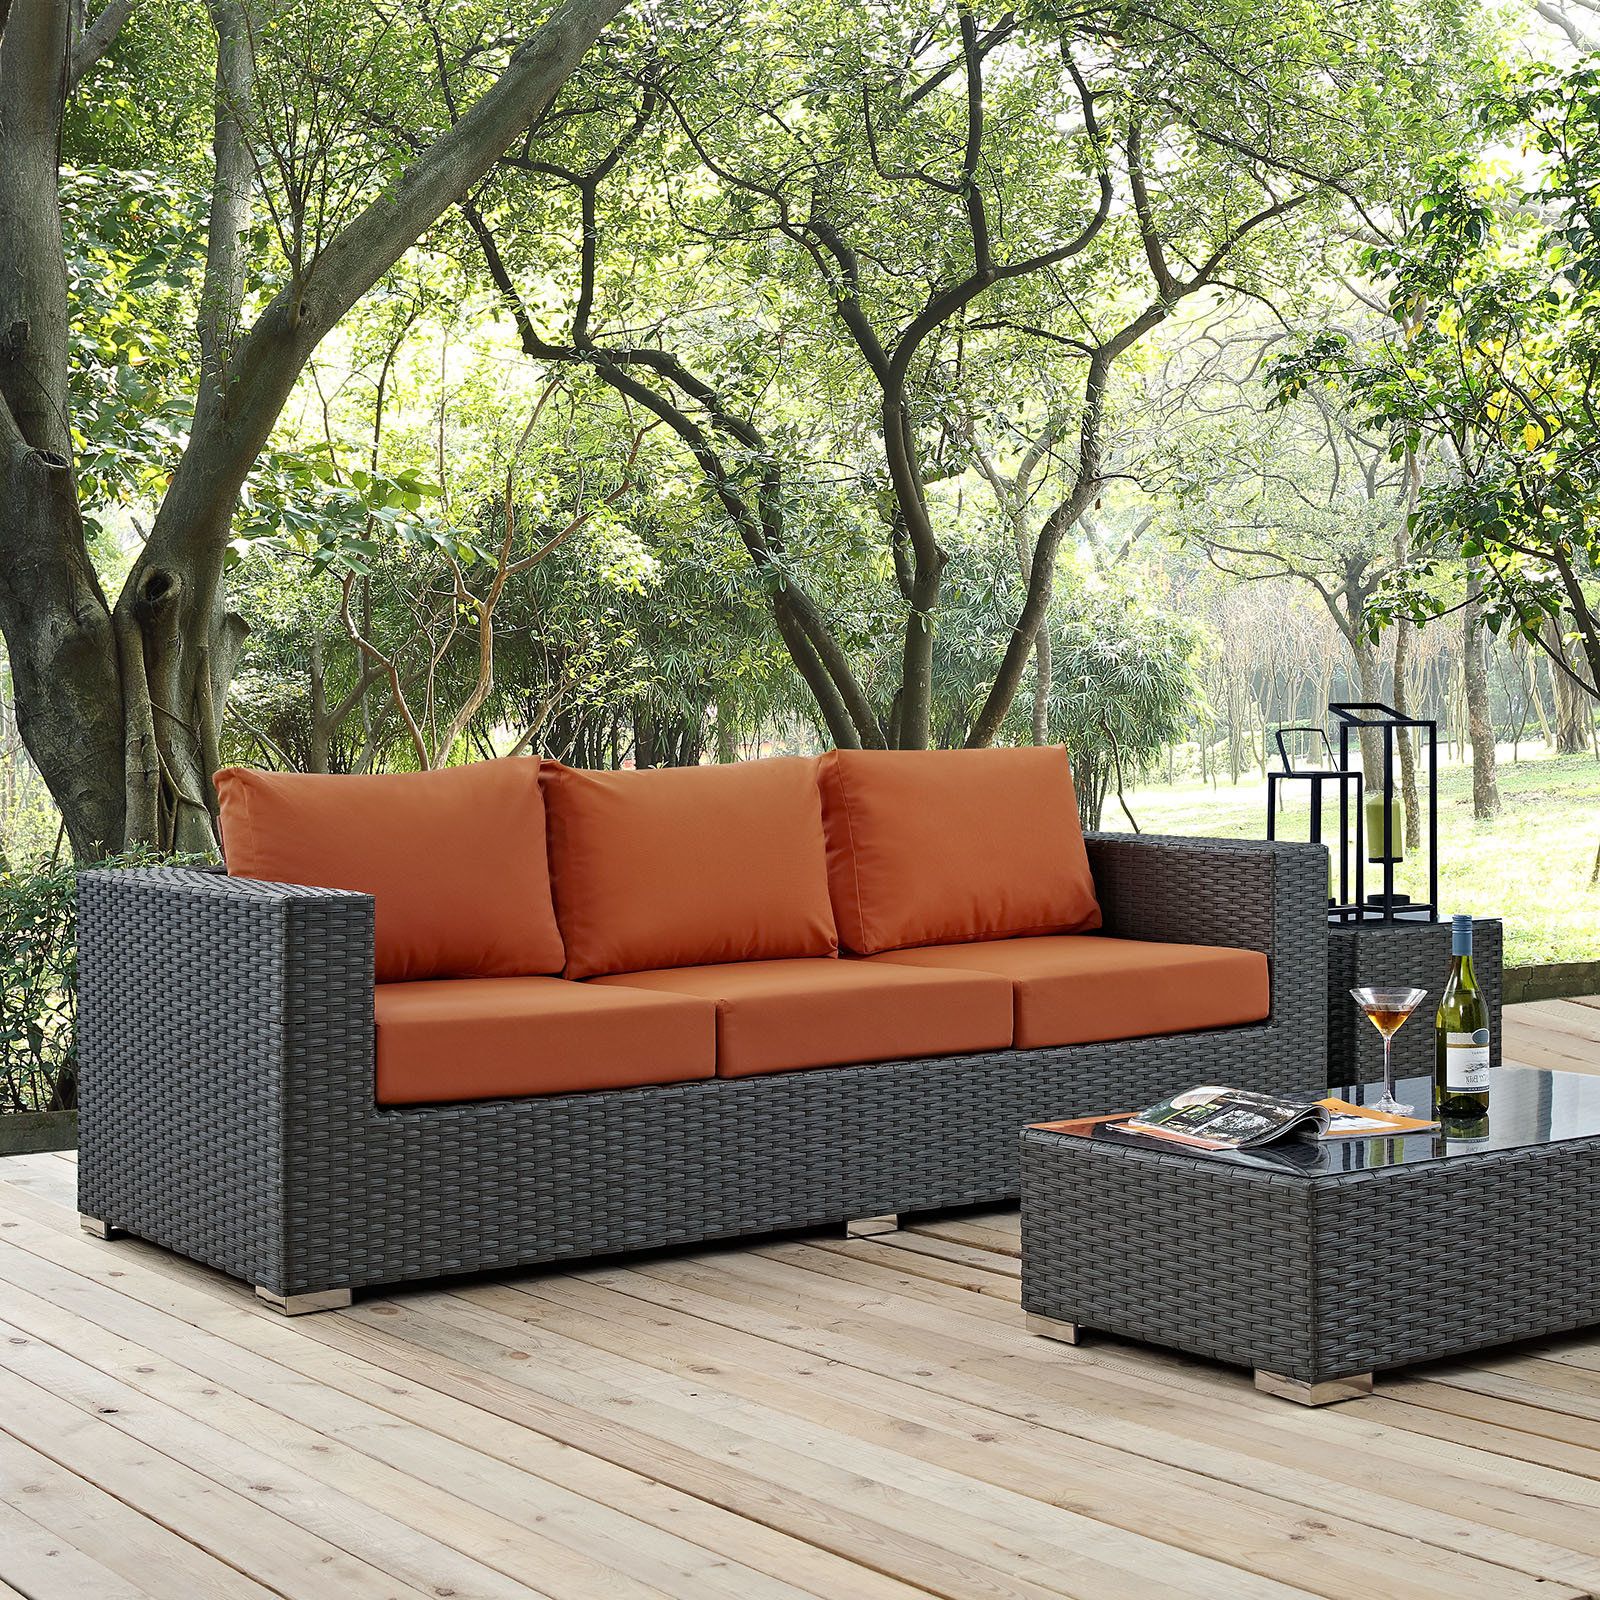 Tripp Sofa With Cushions With Newest Tripp Patio Daybeds With Cushions (View 19 of 20)